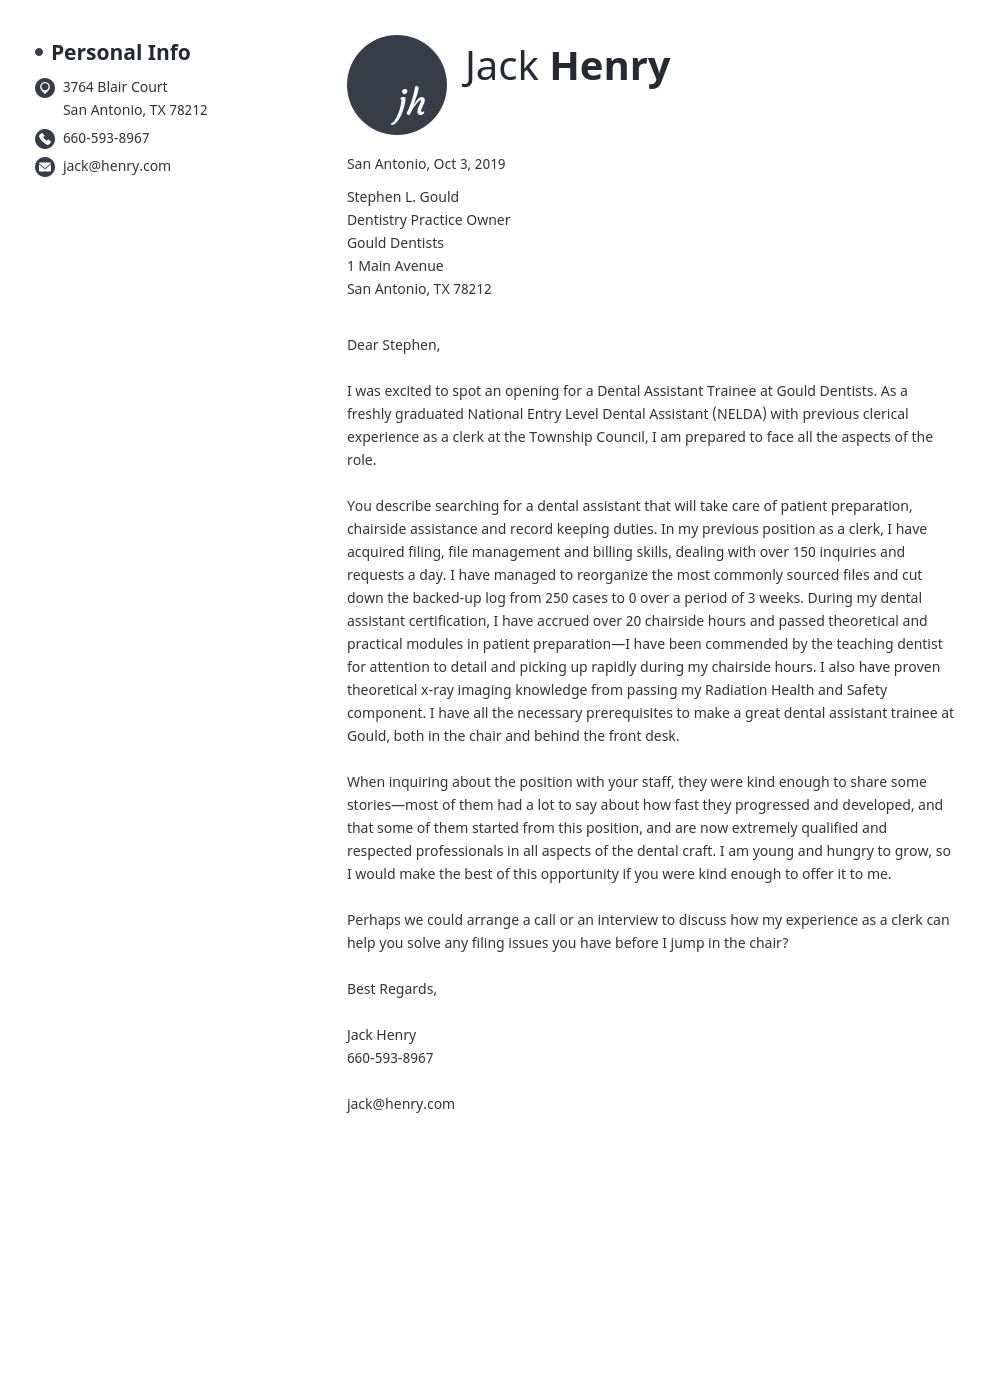 Dental Assistant Cover Letter: Sample & Templates to Fill